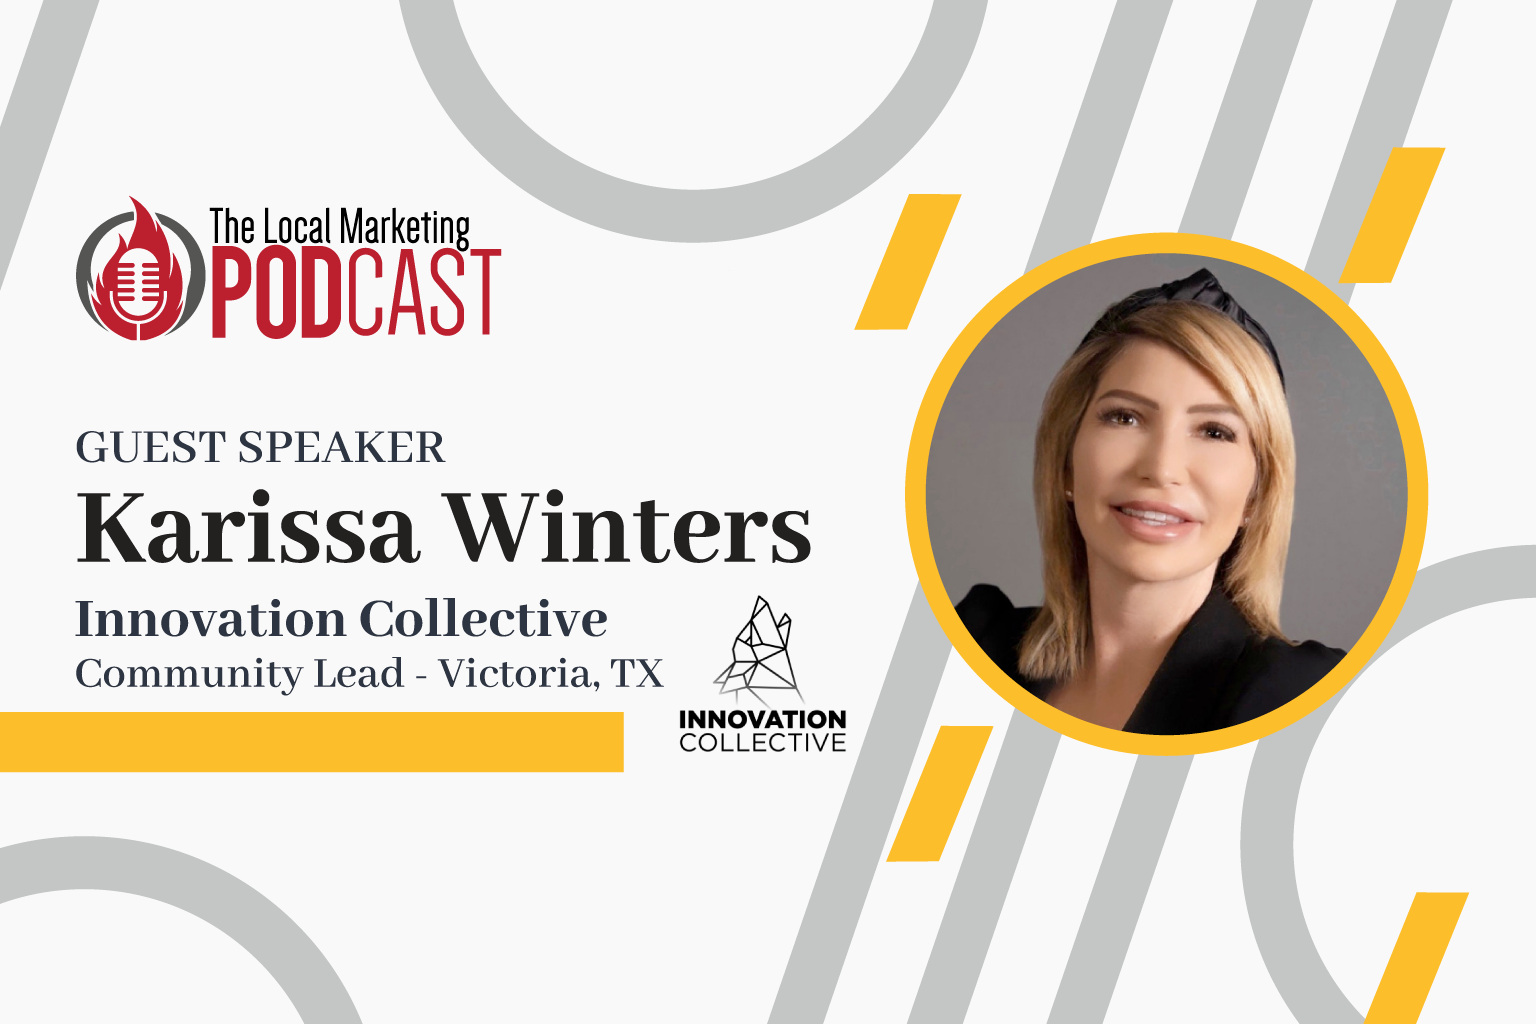 Episode 08: Karissa Winters from Innovation Collective Describes the Importance of Connectivity and Community